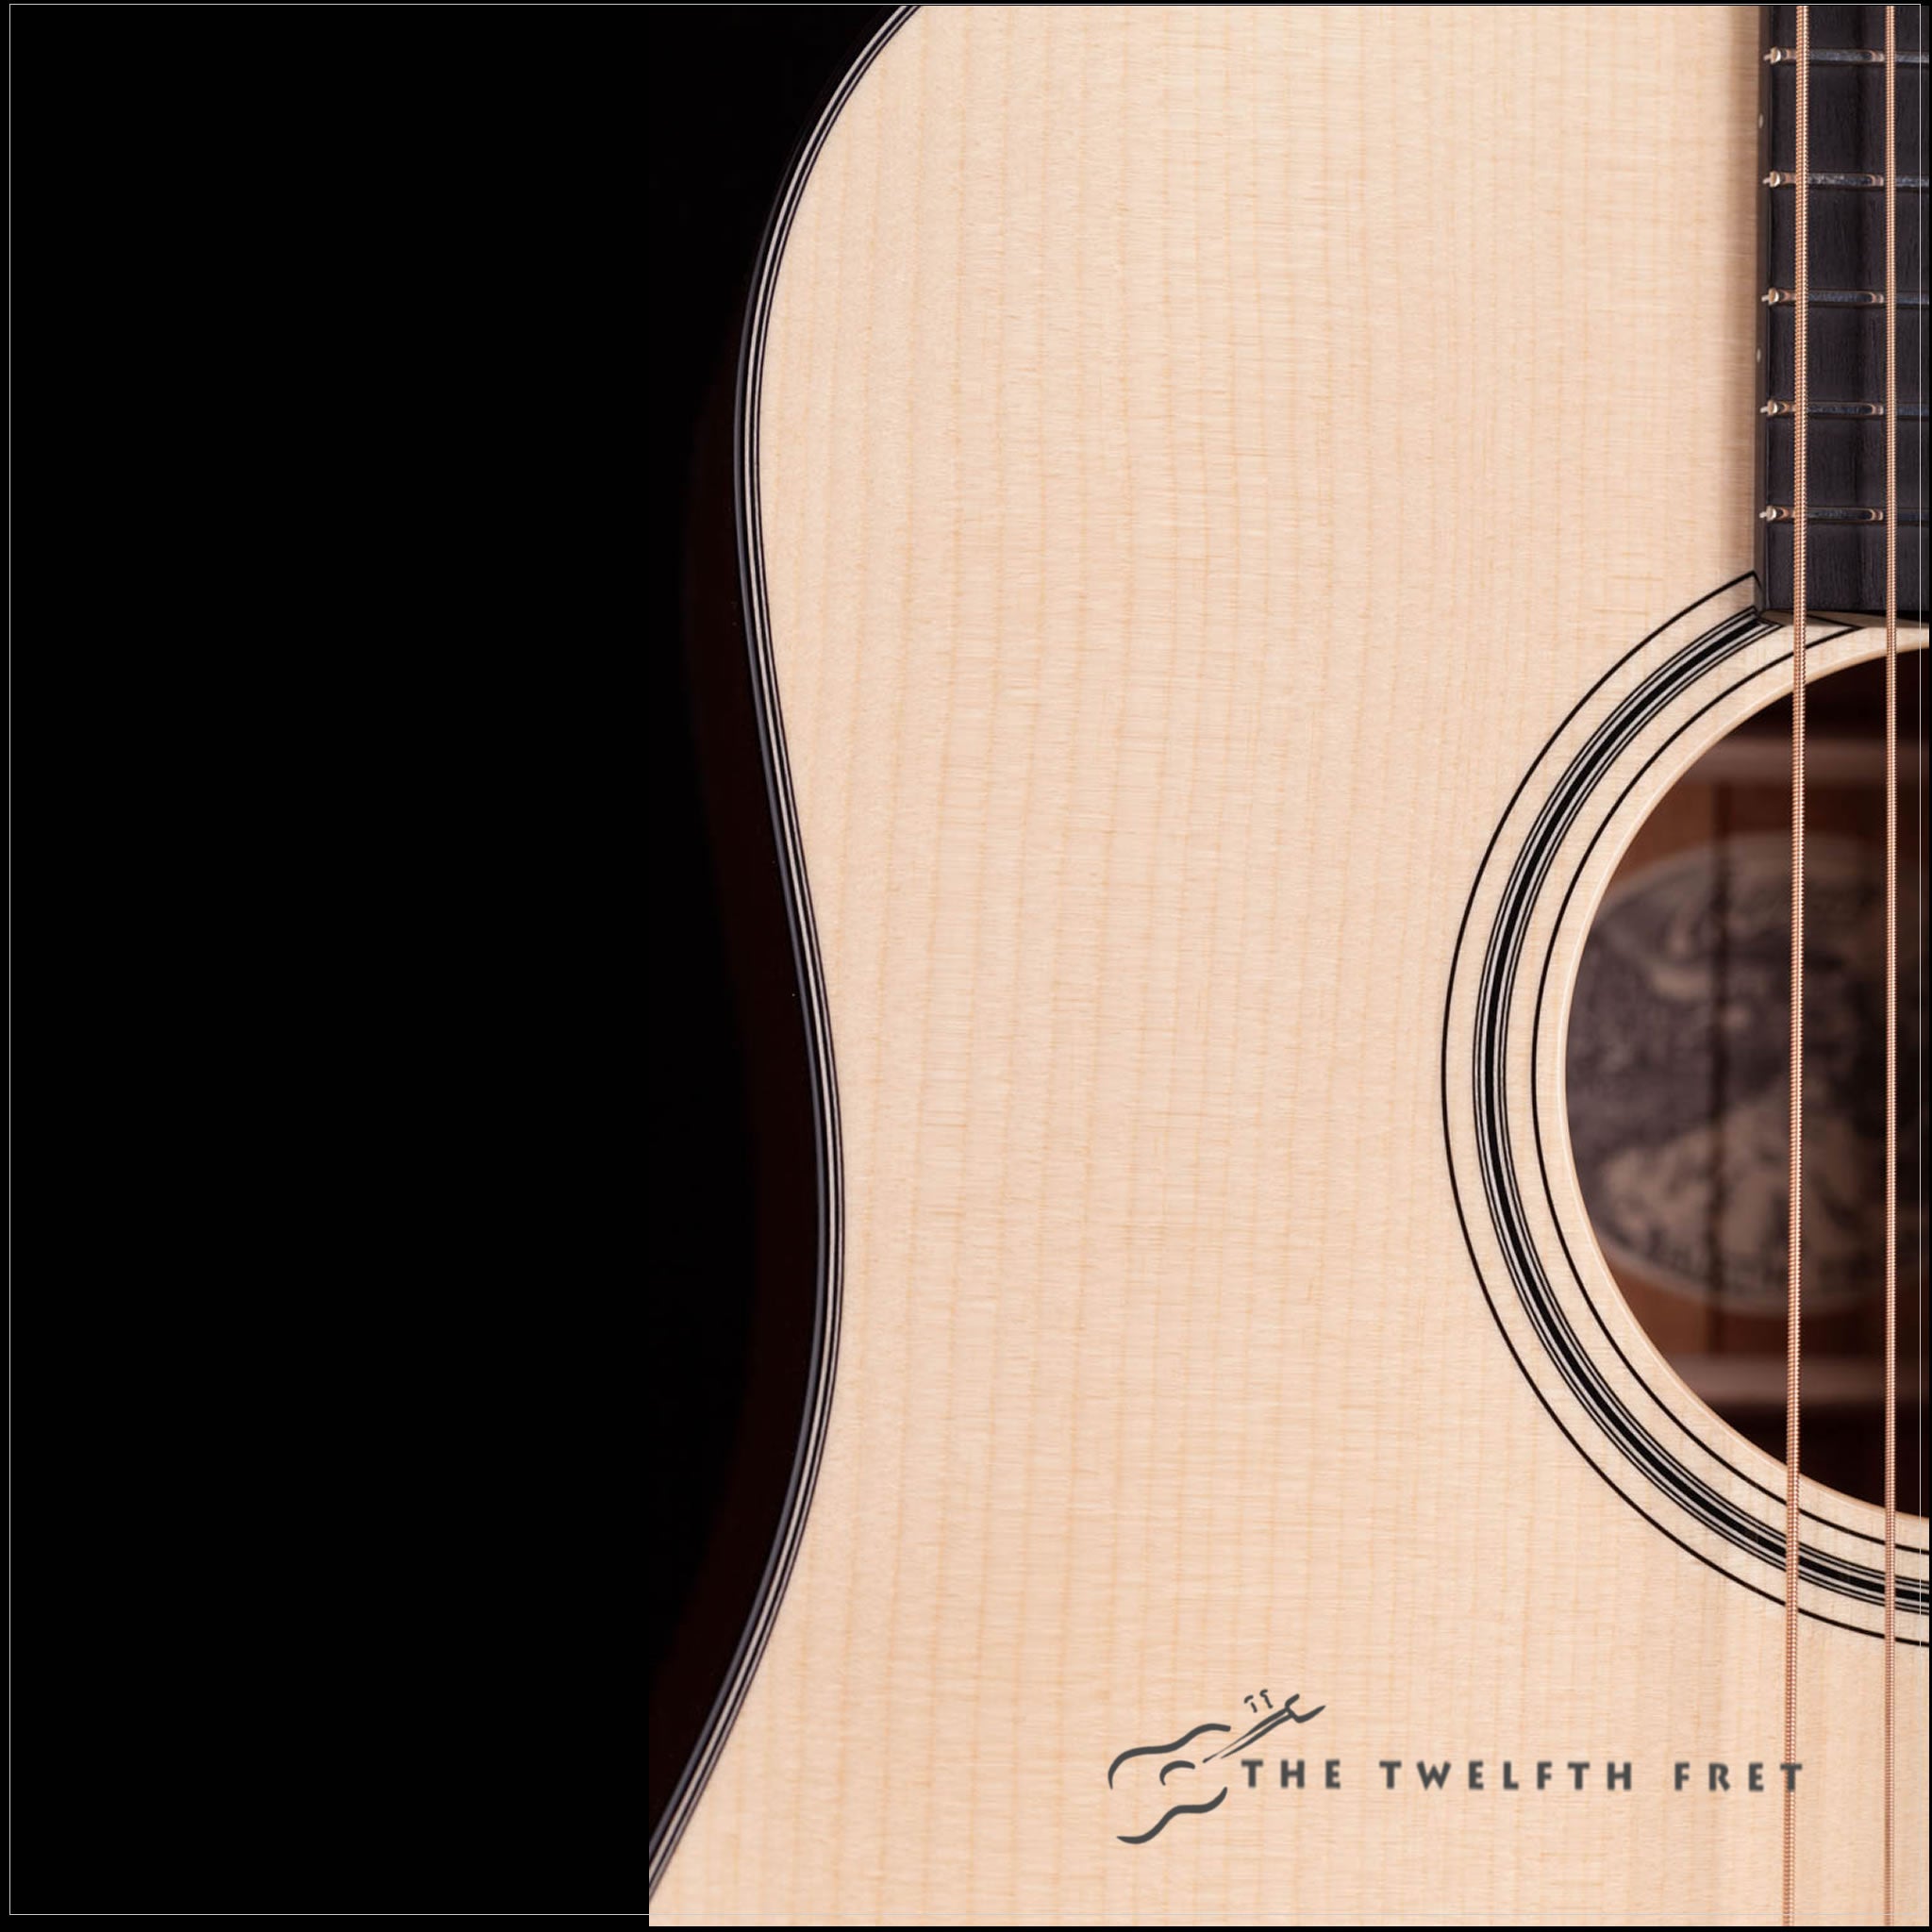 Collings D1 - The Twelfth Fret